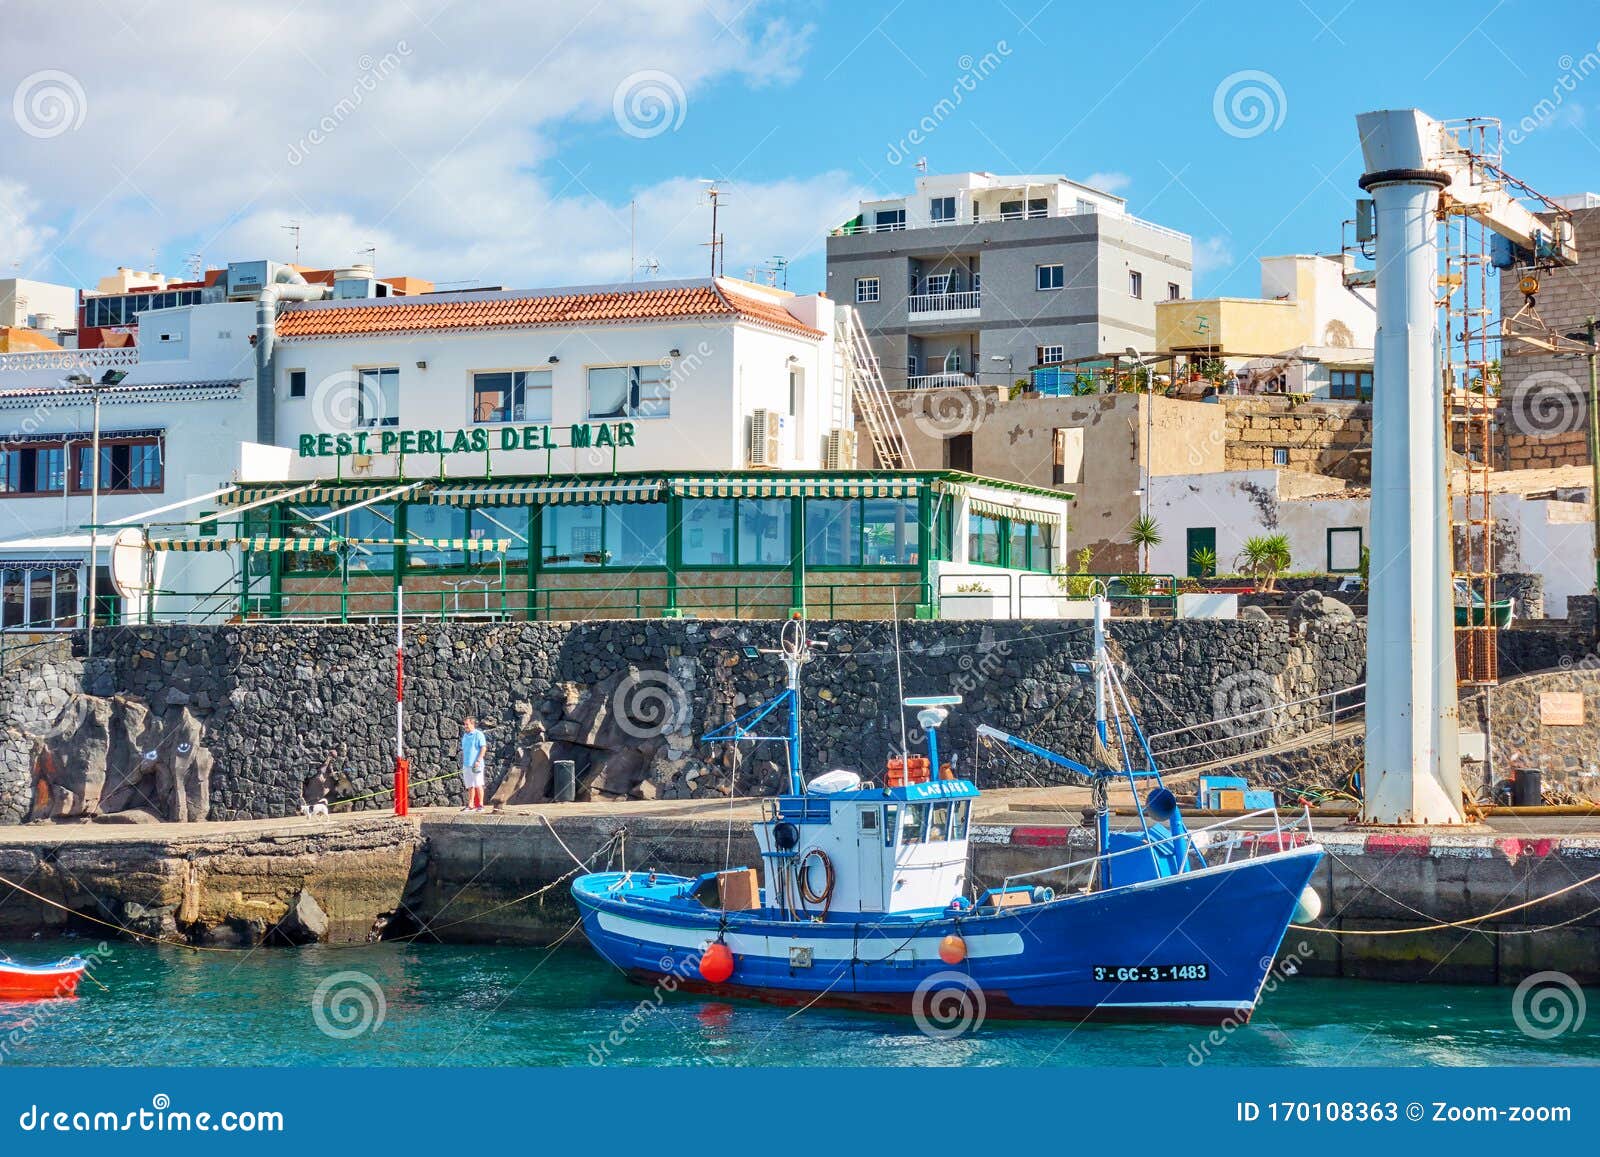 fishing-boat-and-seafood-restaurants-in-los-abrigos-editorial-stock